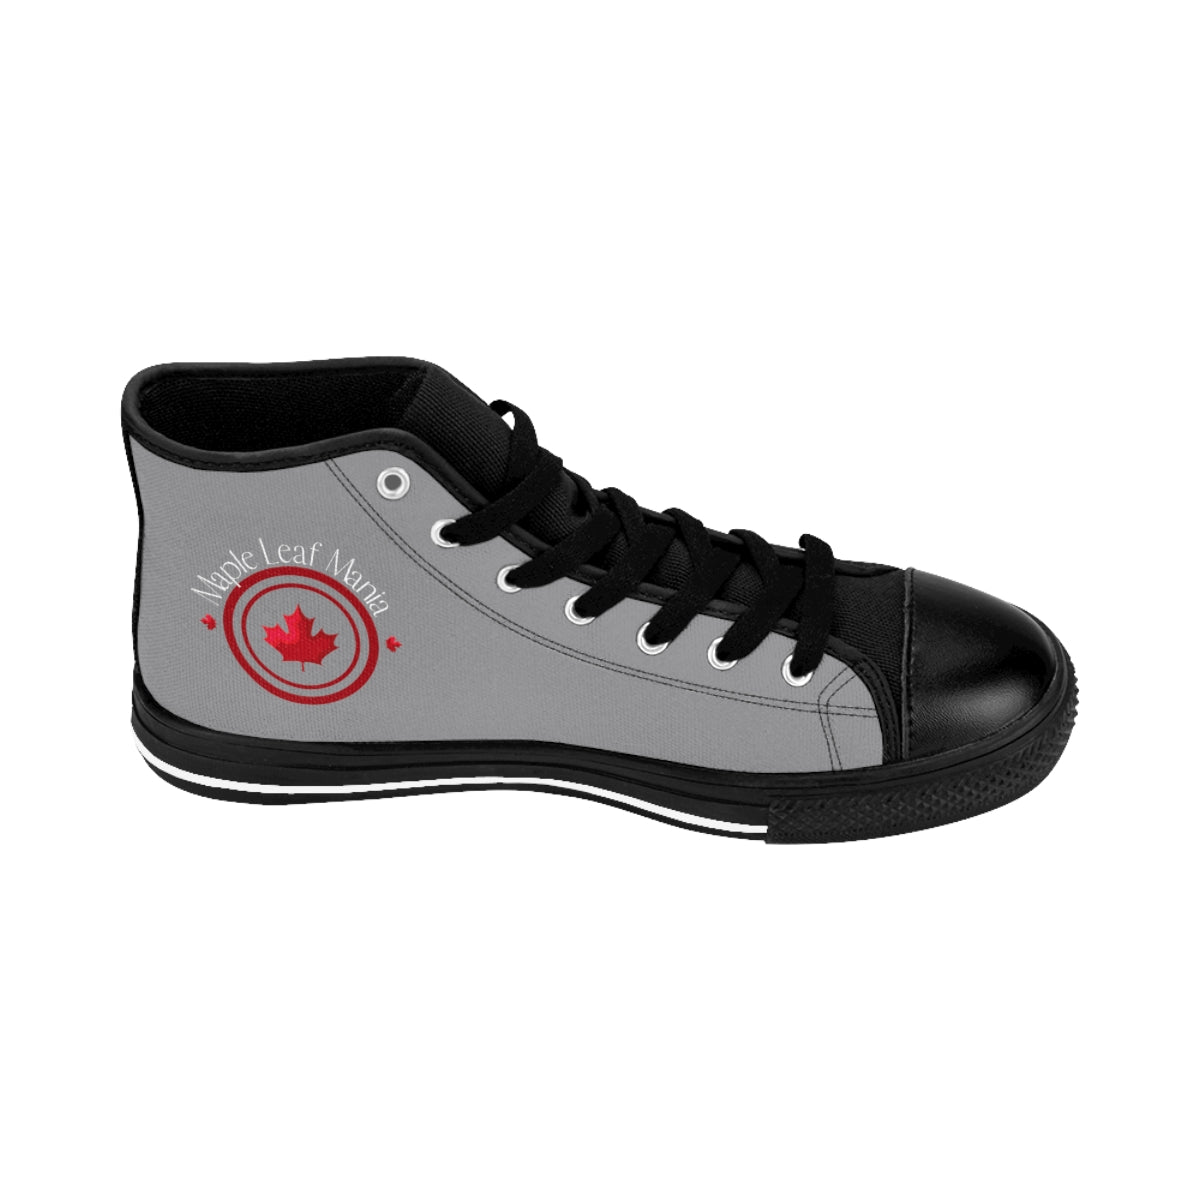 MEN'S HIGH TOP CLASSIC SNEAKERS, MAPLE LEAF MANIA SNEAKERS, BLACK HIGH TOP SNEAKERS GRAY